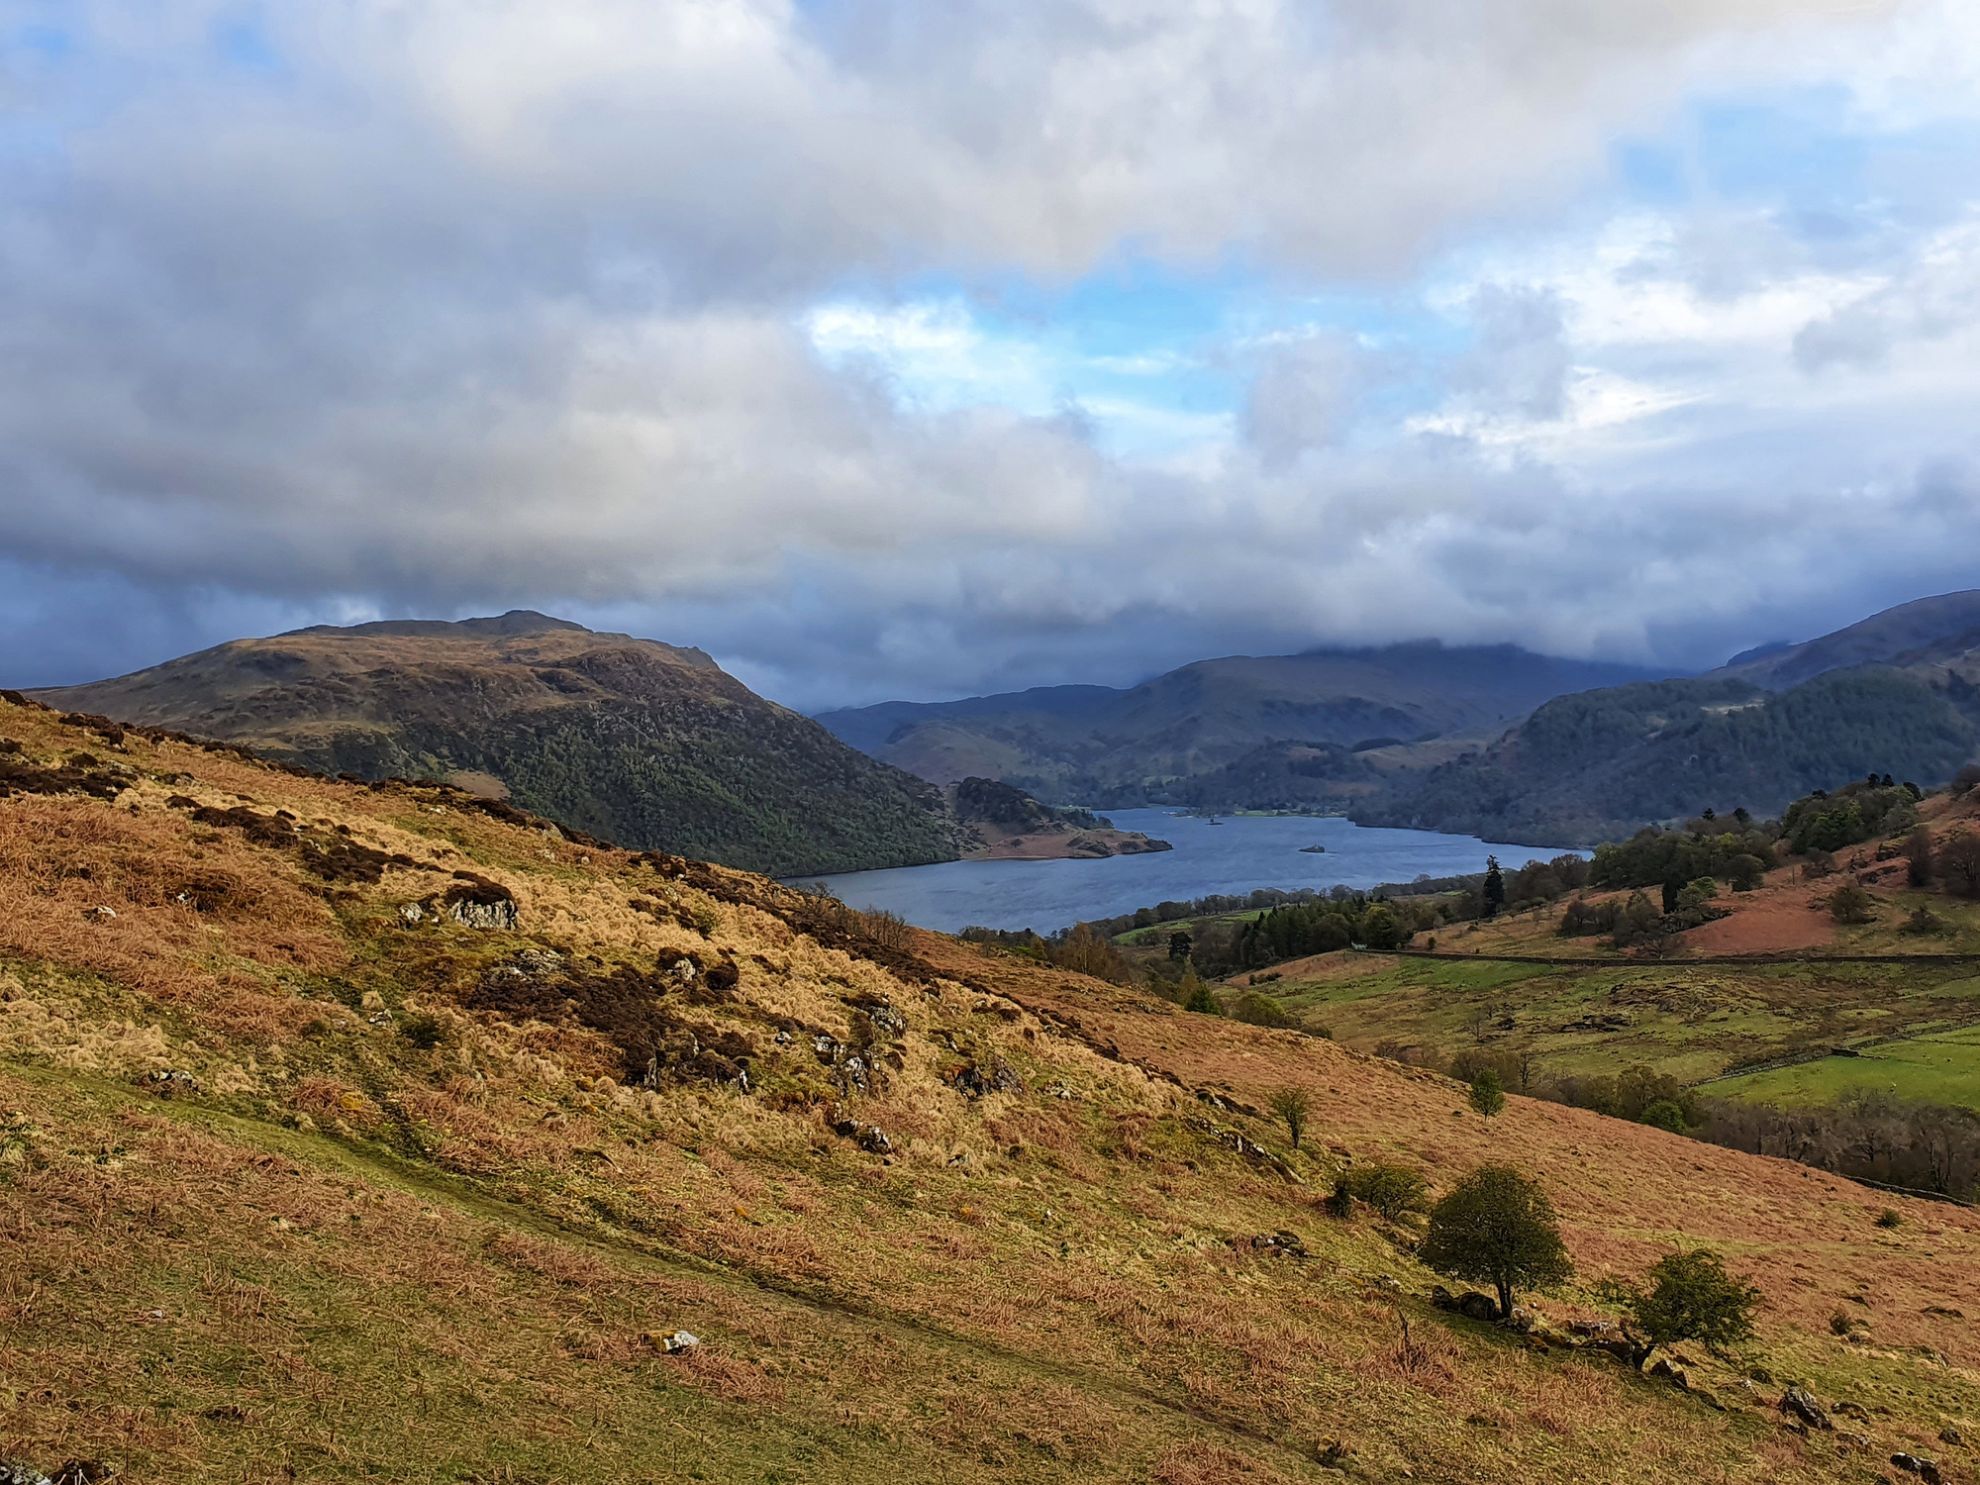 Despite being a low fell, surrounding views mean Gowbarrow can feel quite mountainous. Photo: Getty